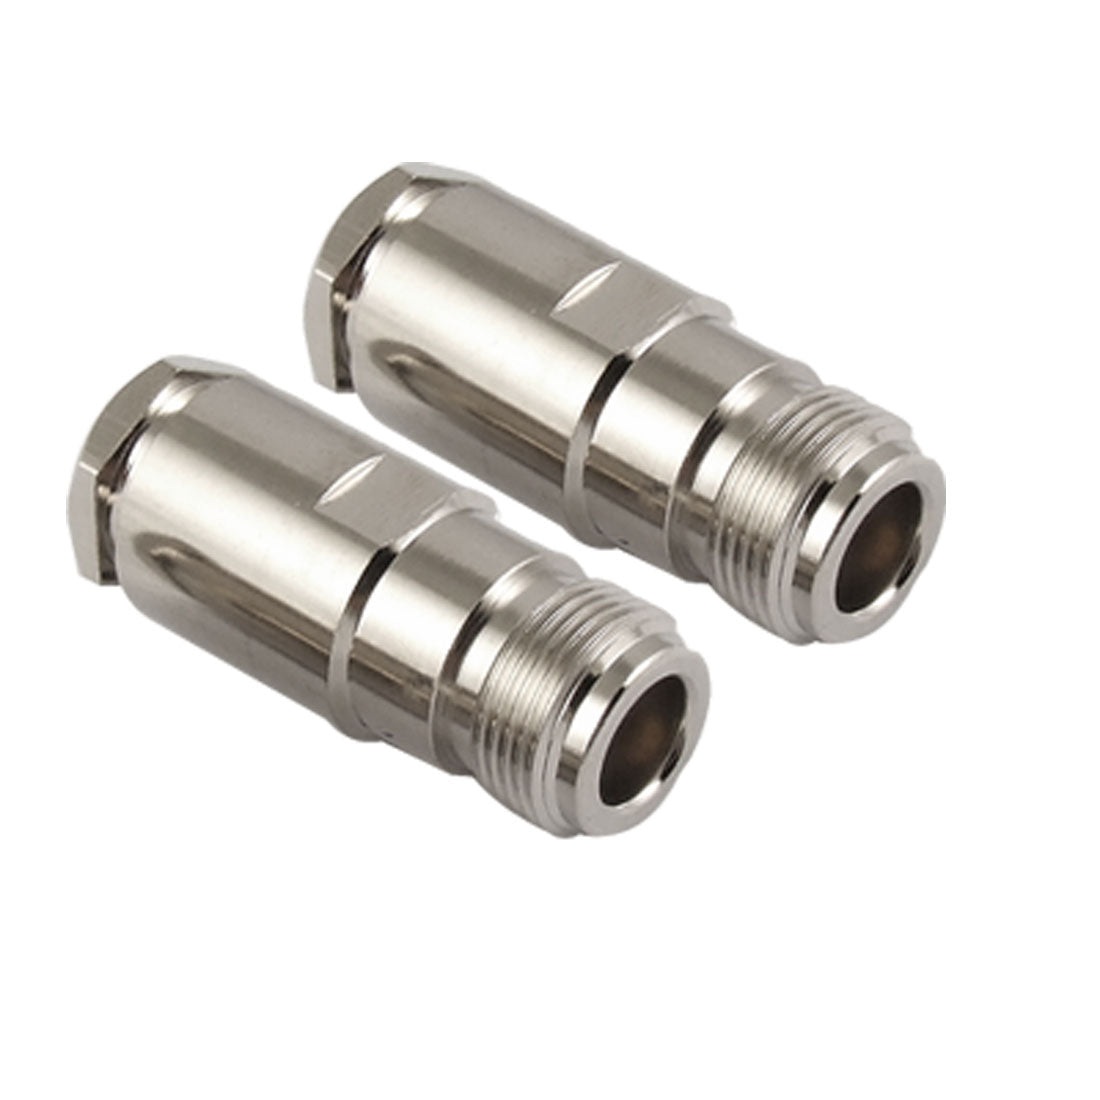 uxcell Uxcell 2pcs N Female Clamp RG8 RG142 RG400 RF Connector Adapter SYV-50-7-1